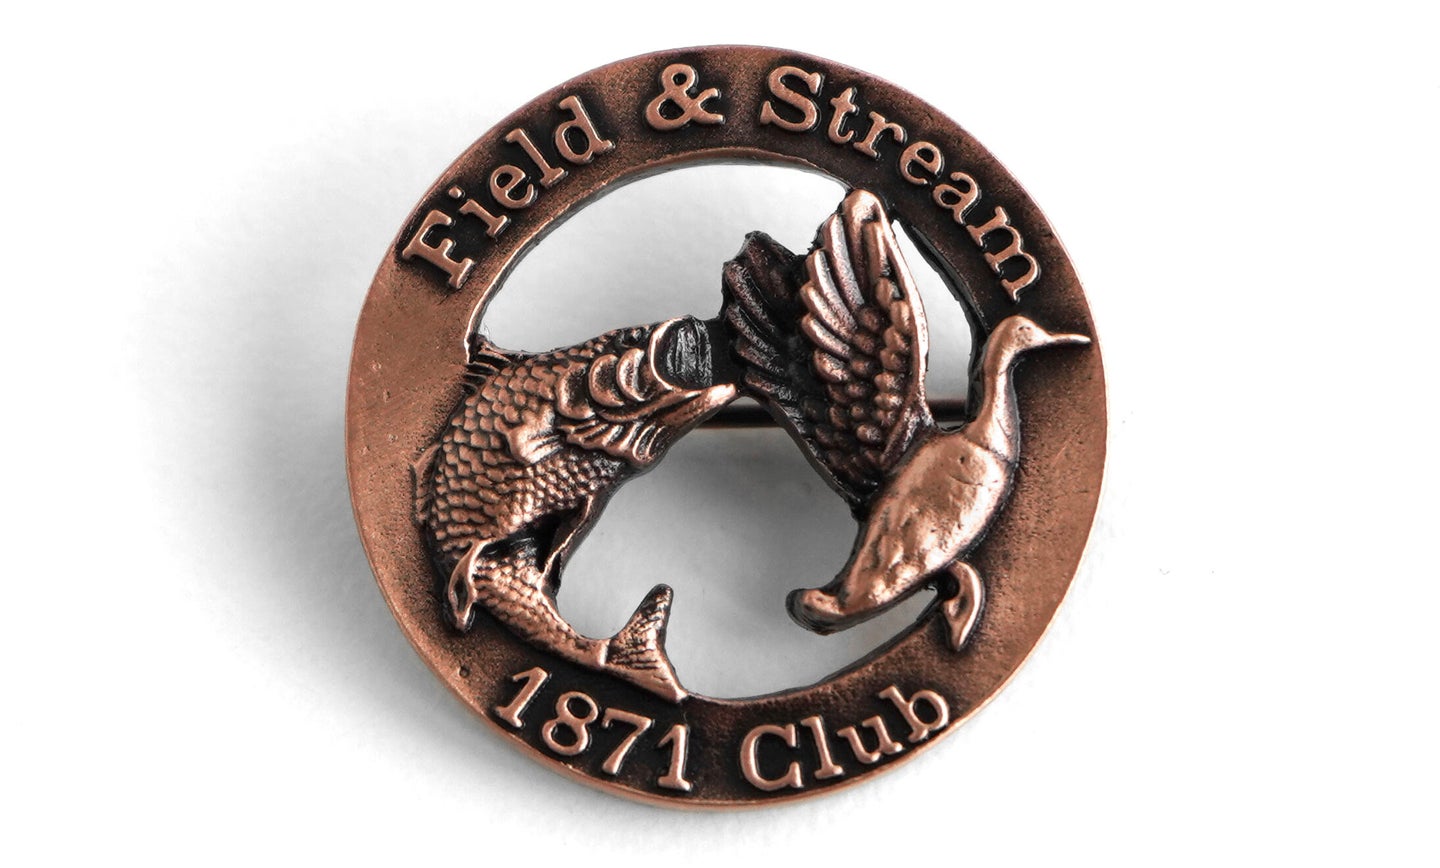 A copper field and stream honor badge pin with a fish and duck on the front.